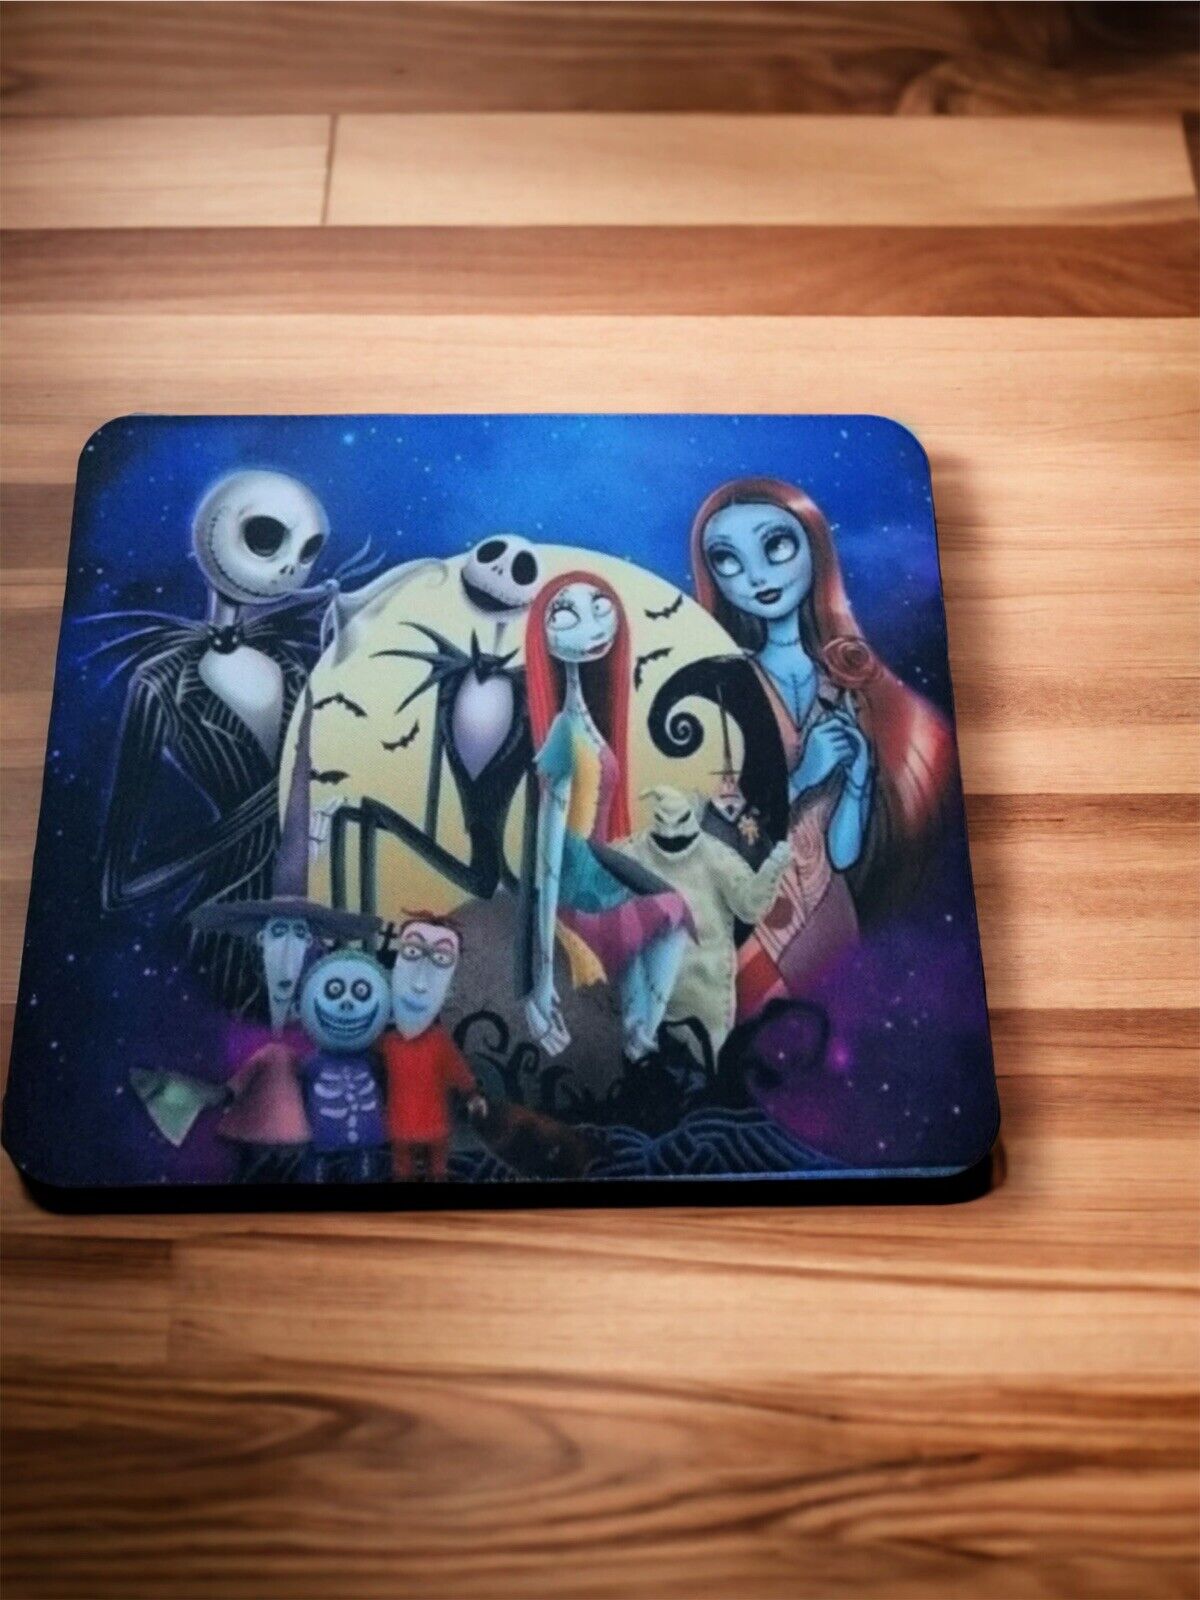 Nightmare before Christmas mouse pad polyester 9 x 10 new for computer or gaming